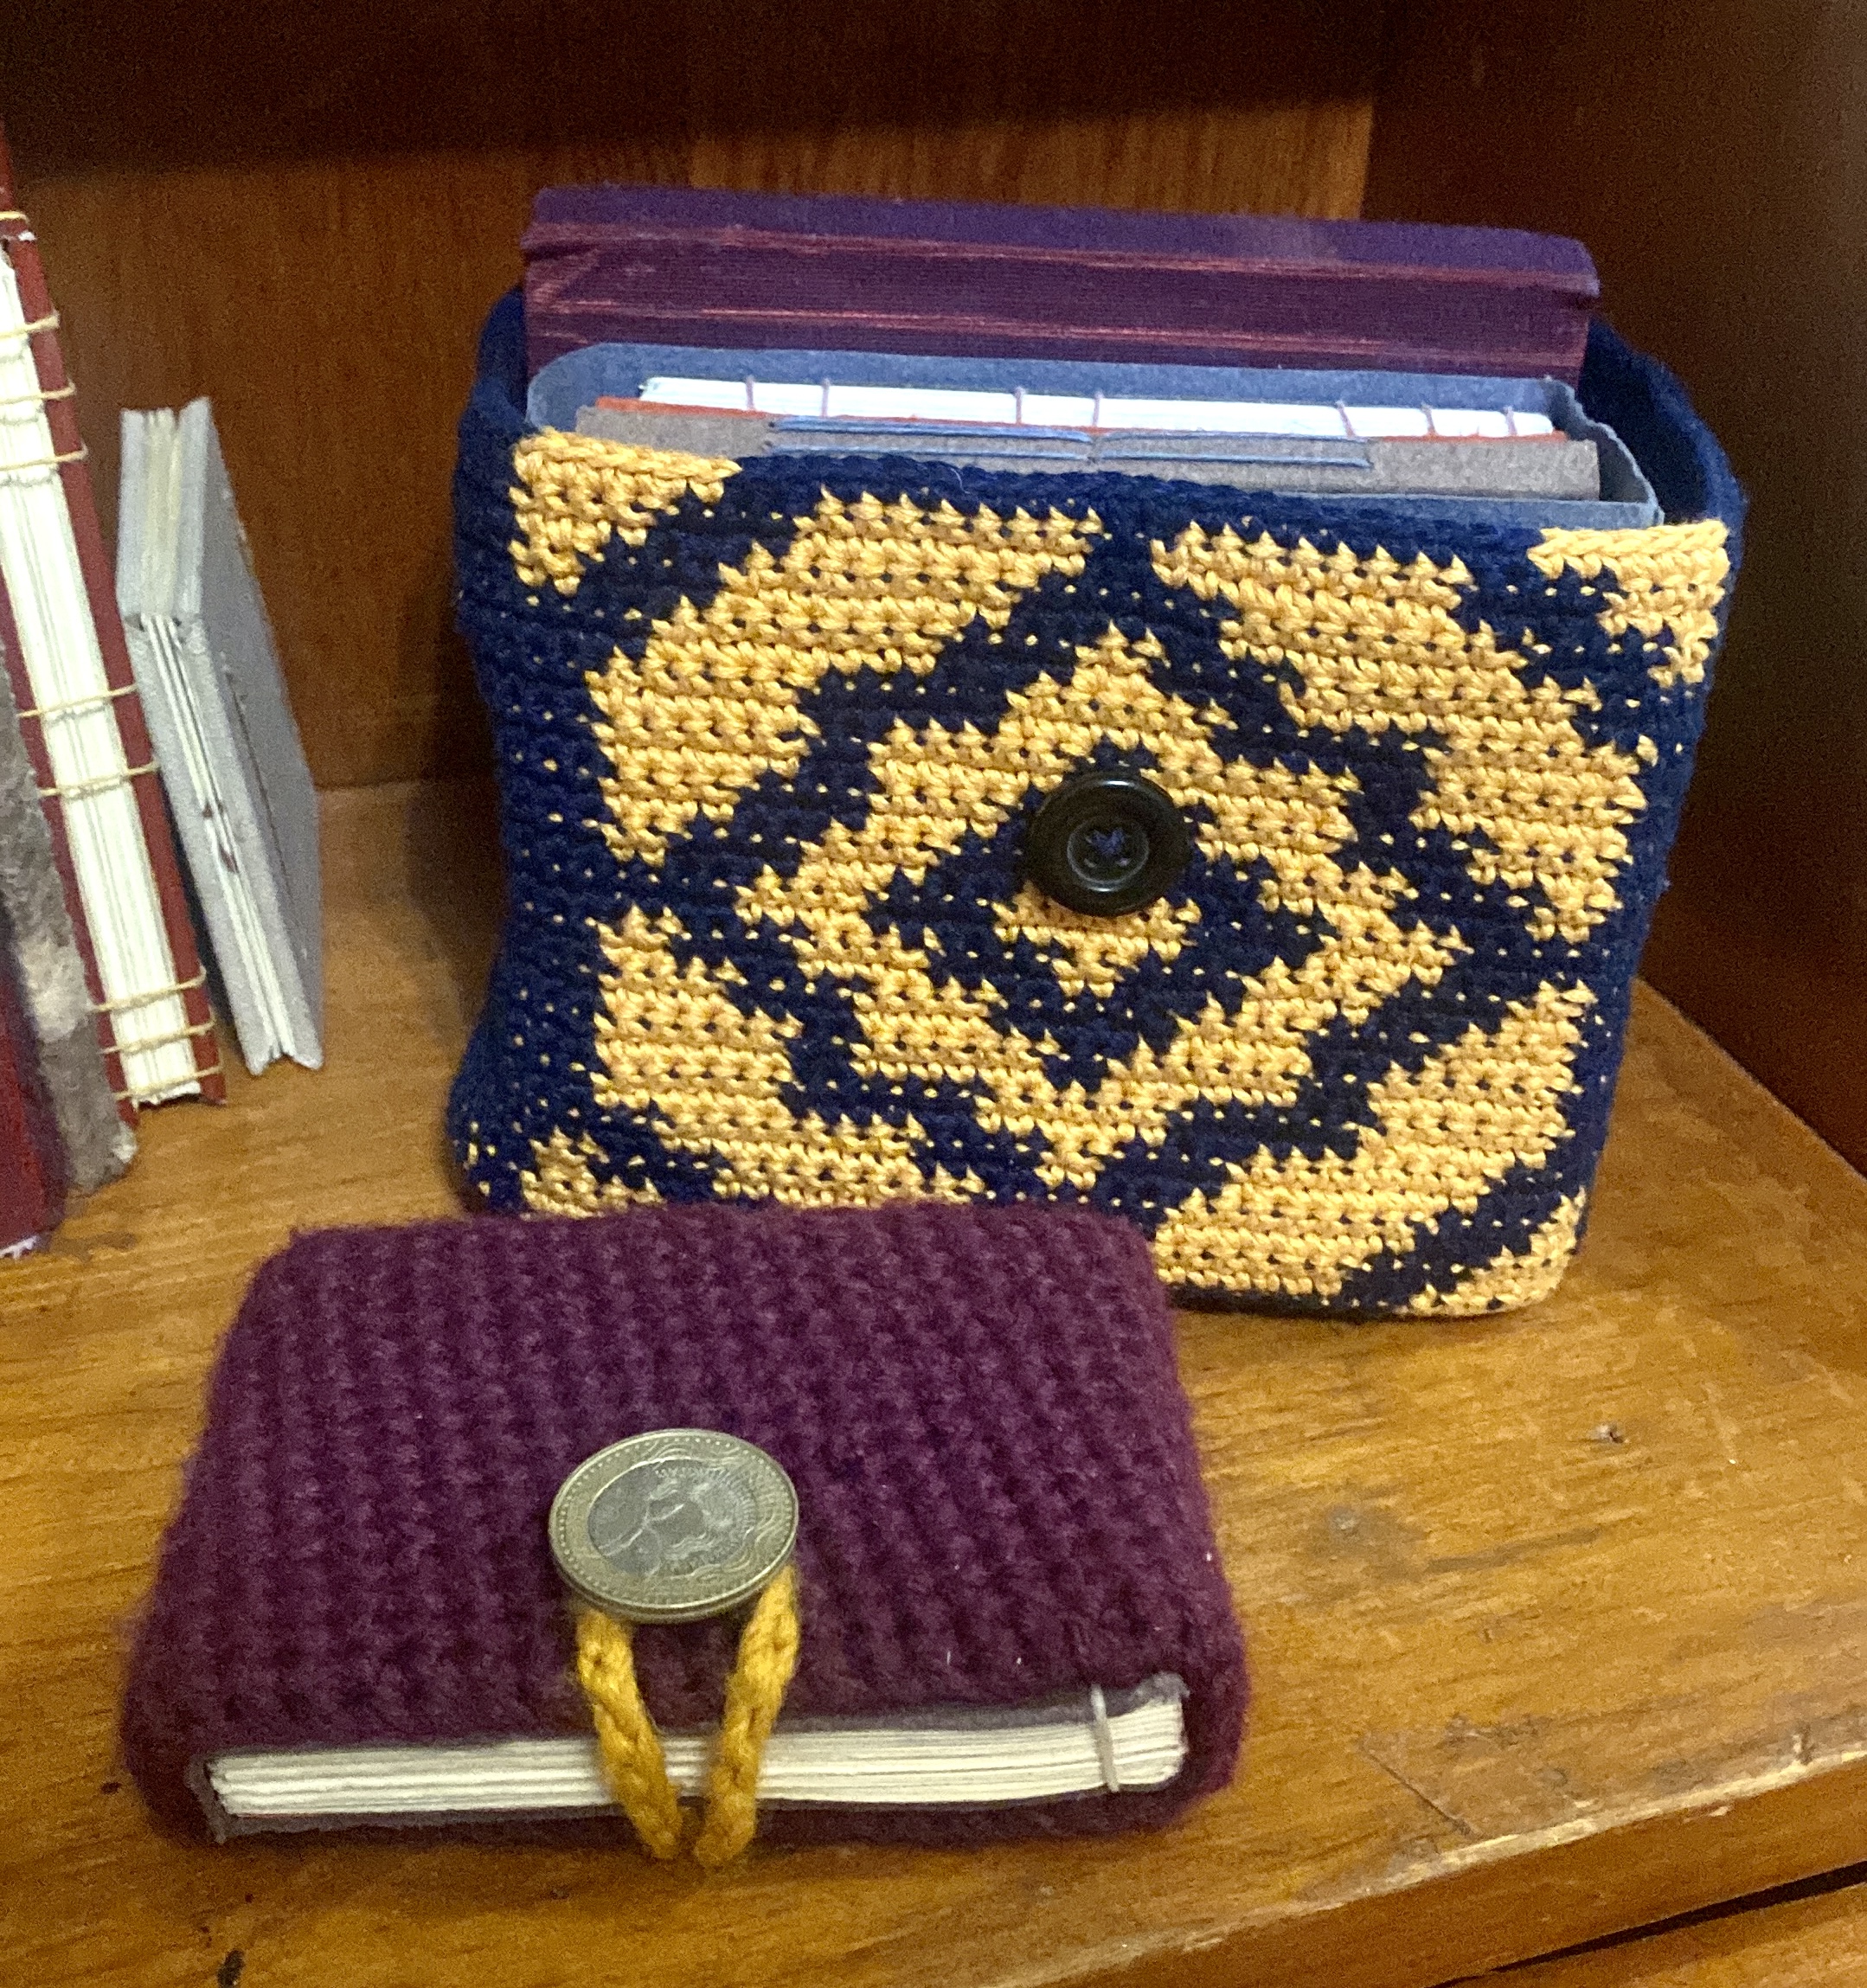 A crochet box with books inside behind a small book with a crochet cover